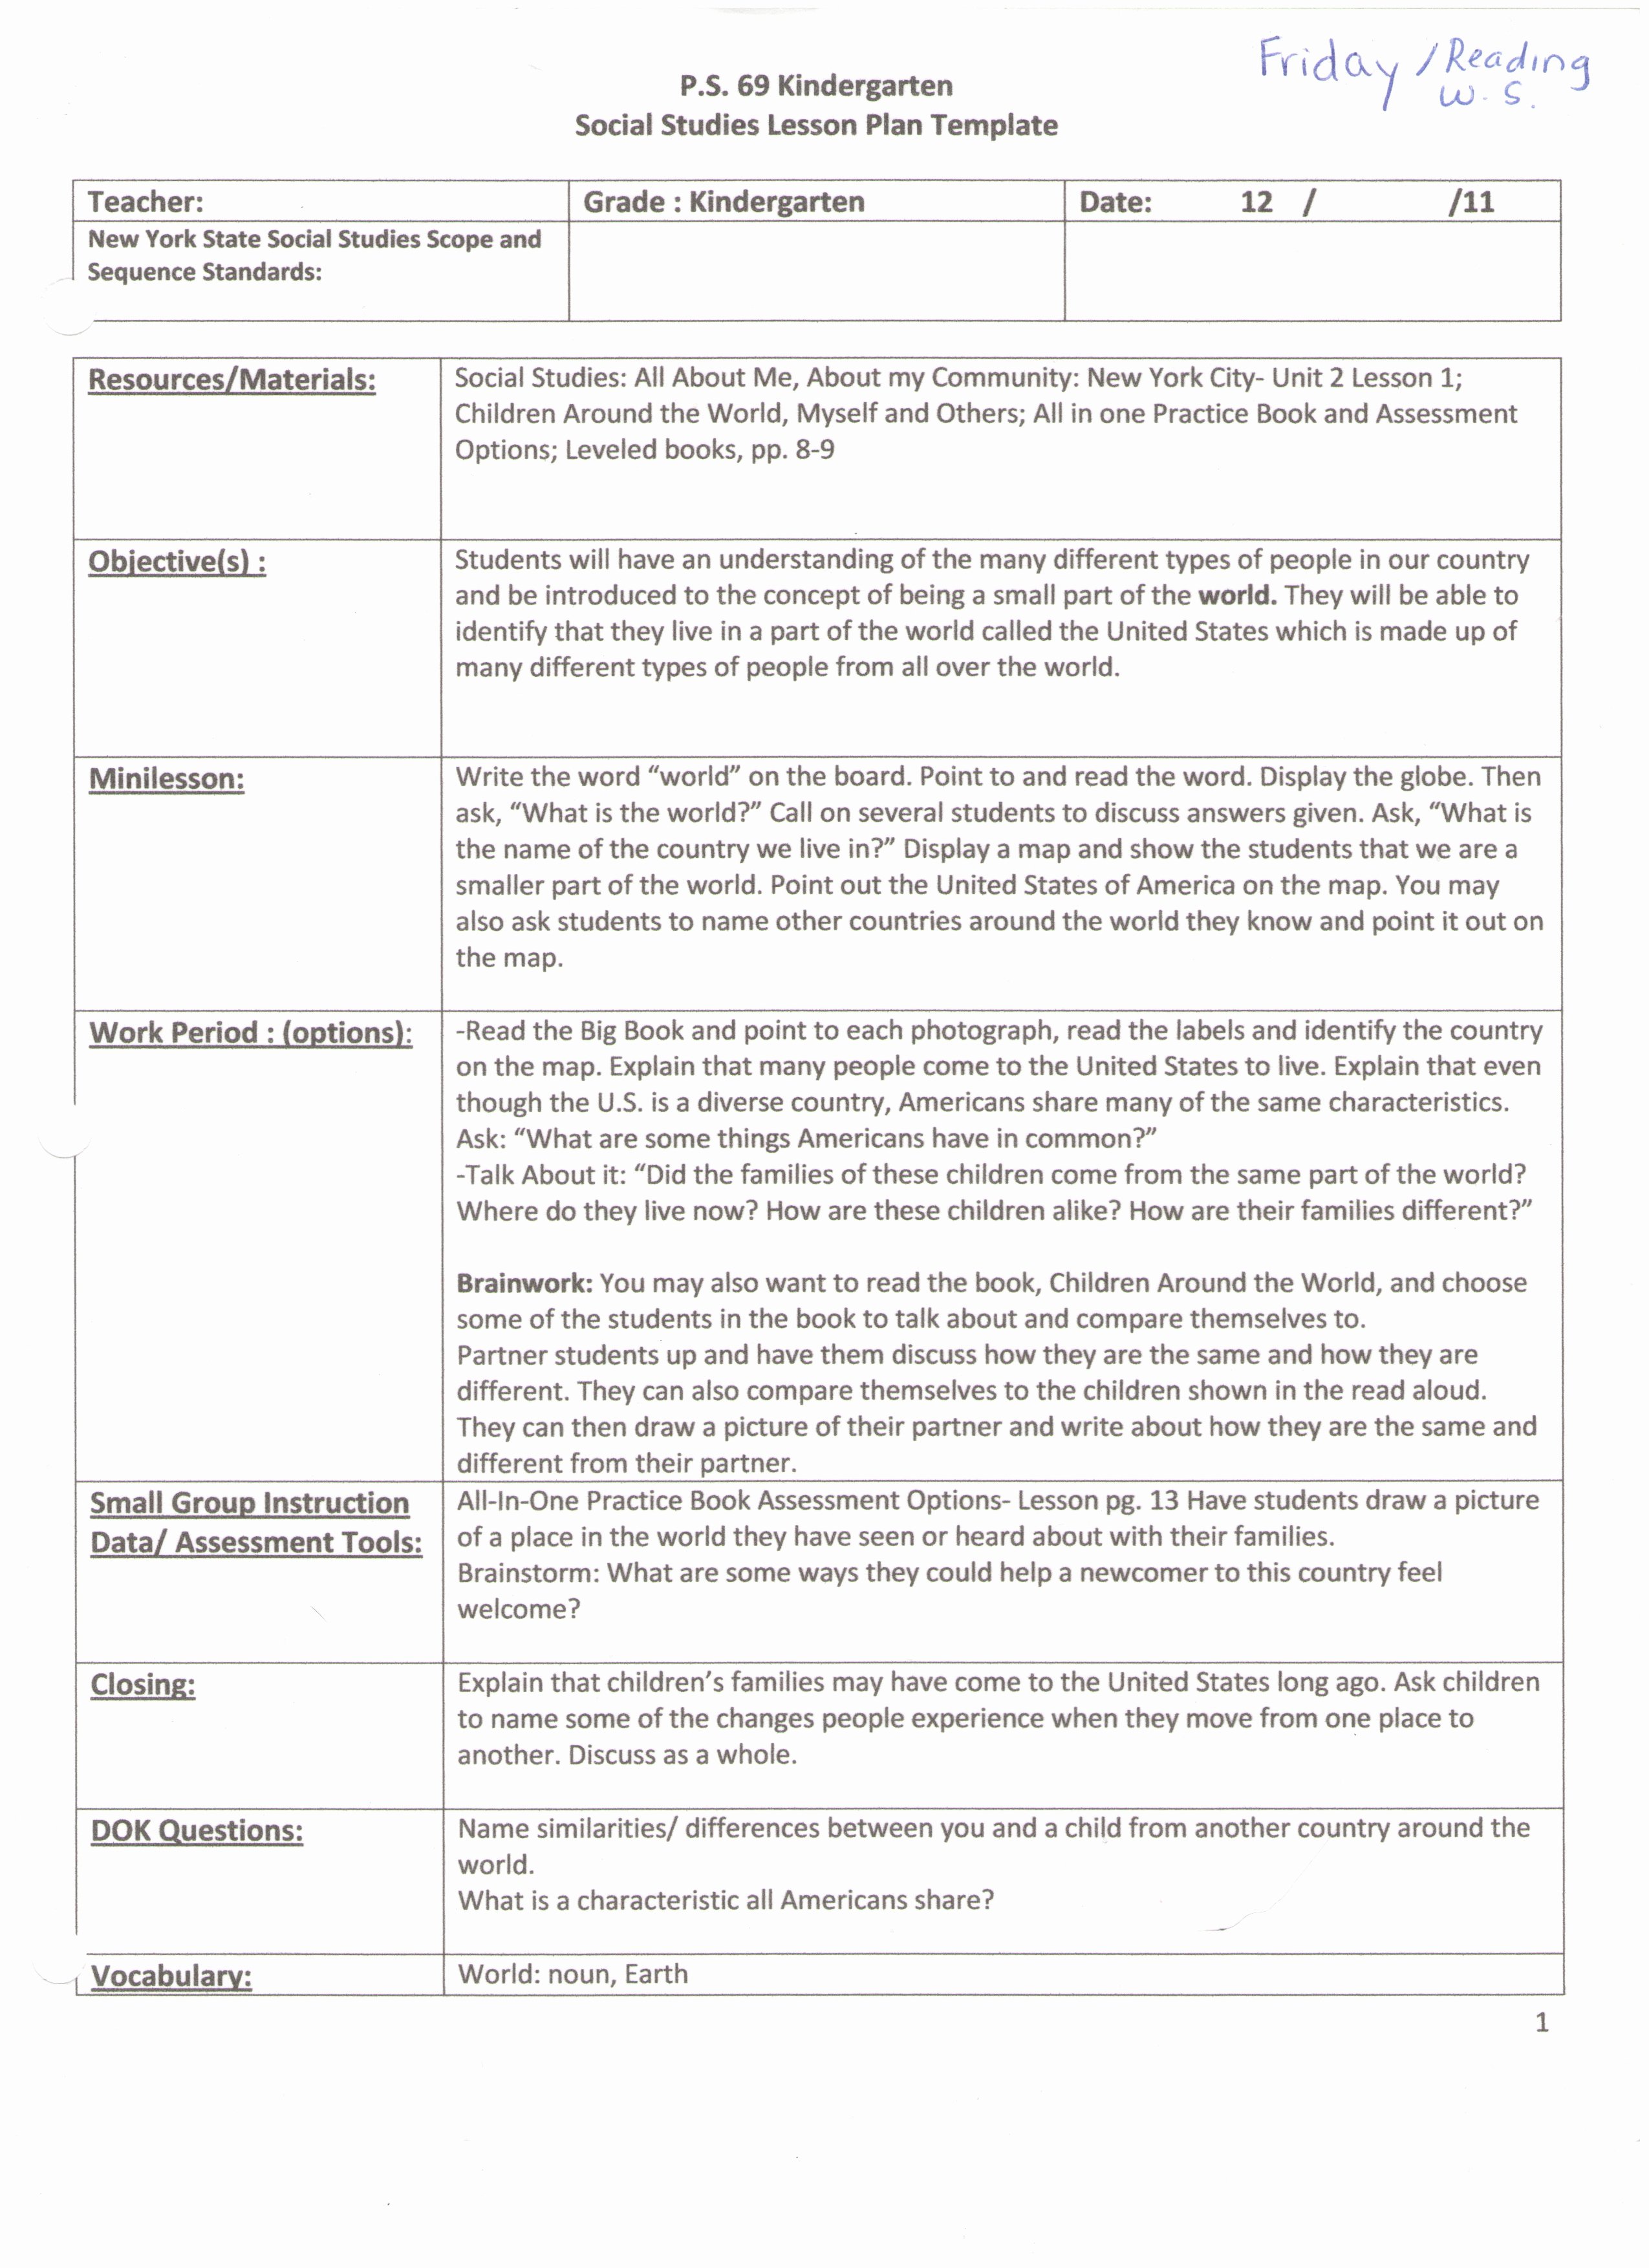 Social Studies Lesson Plan Templates Awesome Best S Of social Stu S Lesson Plans 7th Grade social Stu S Lesson Plans social